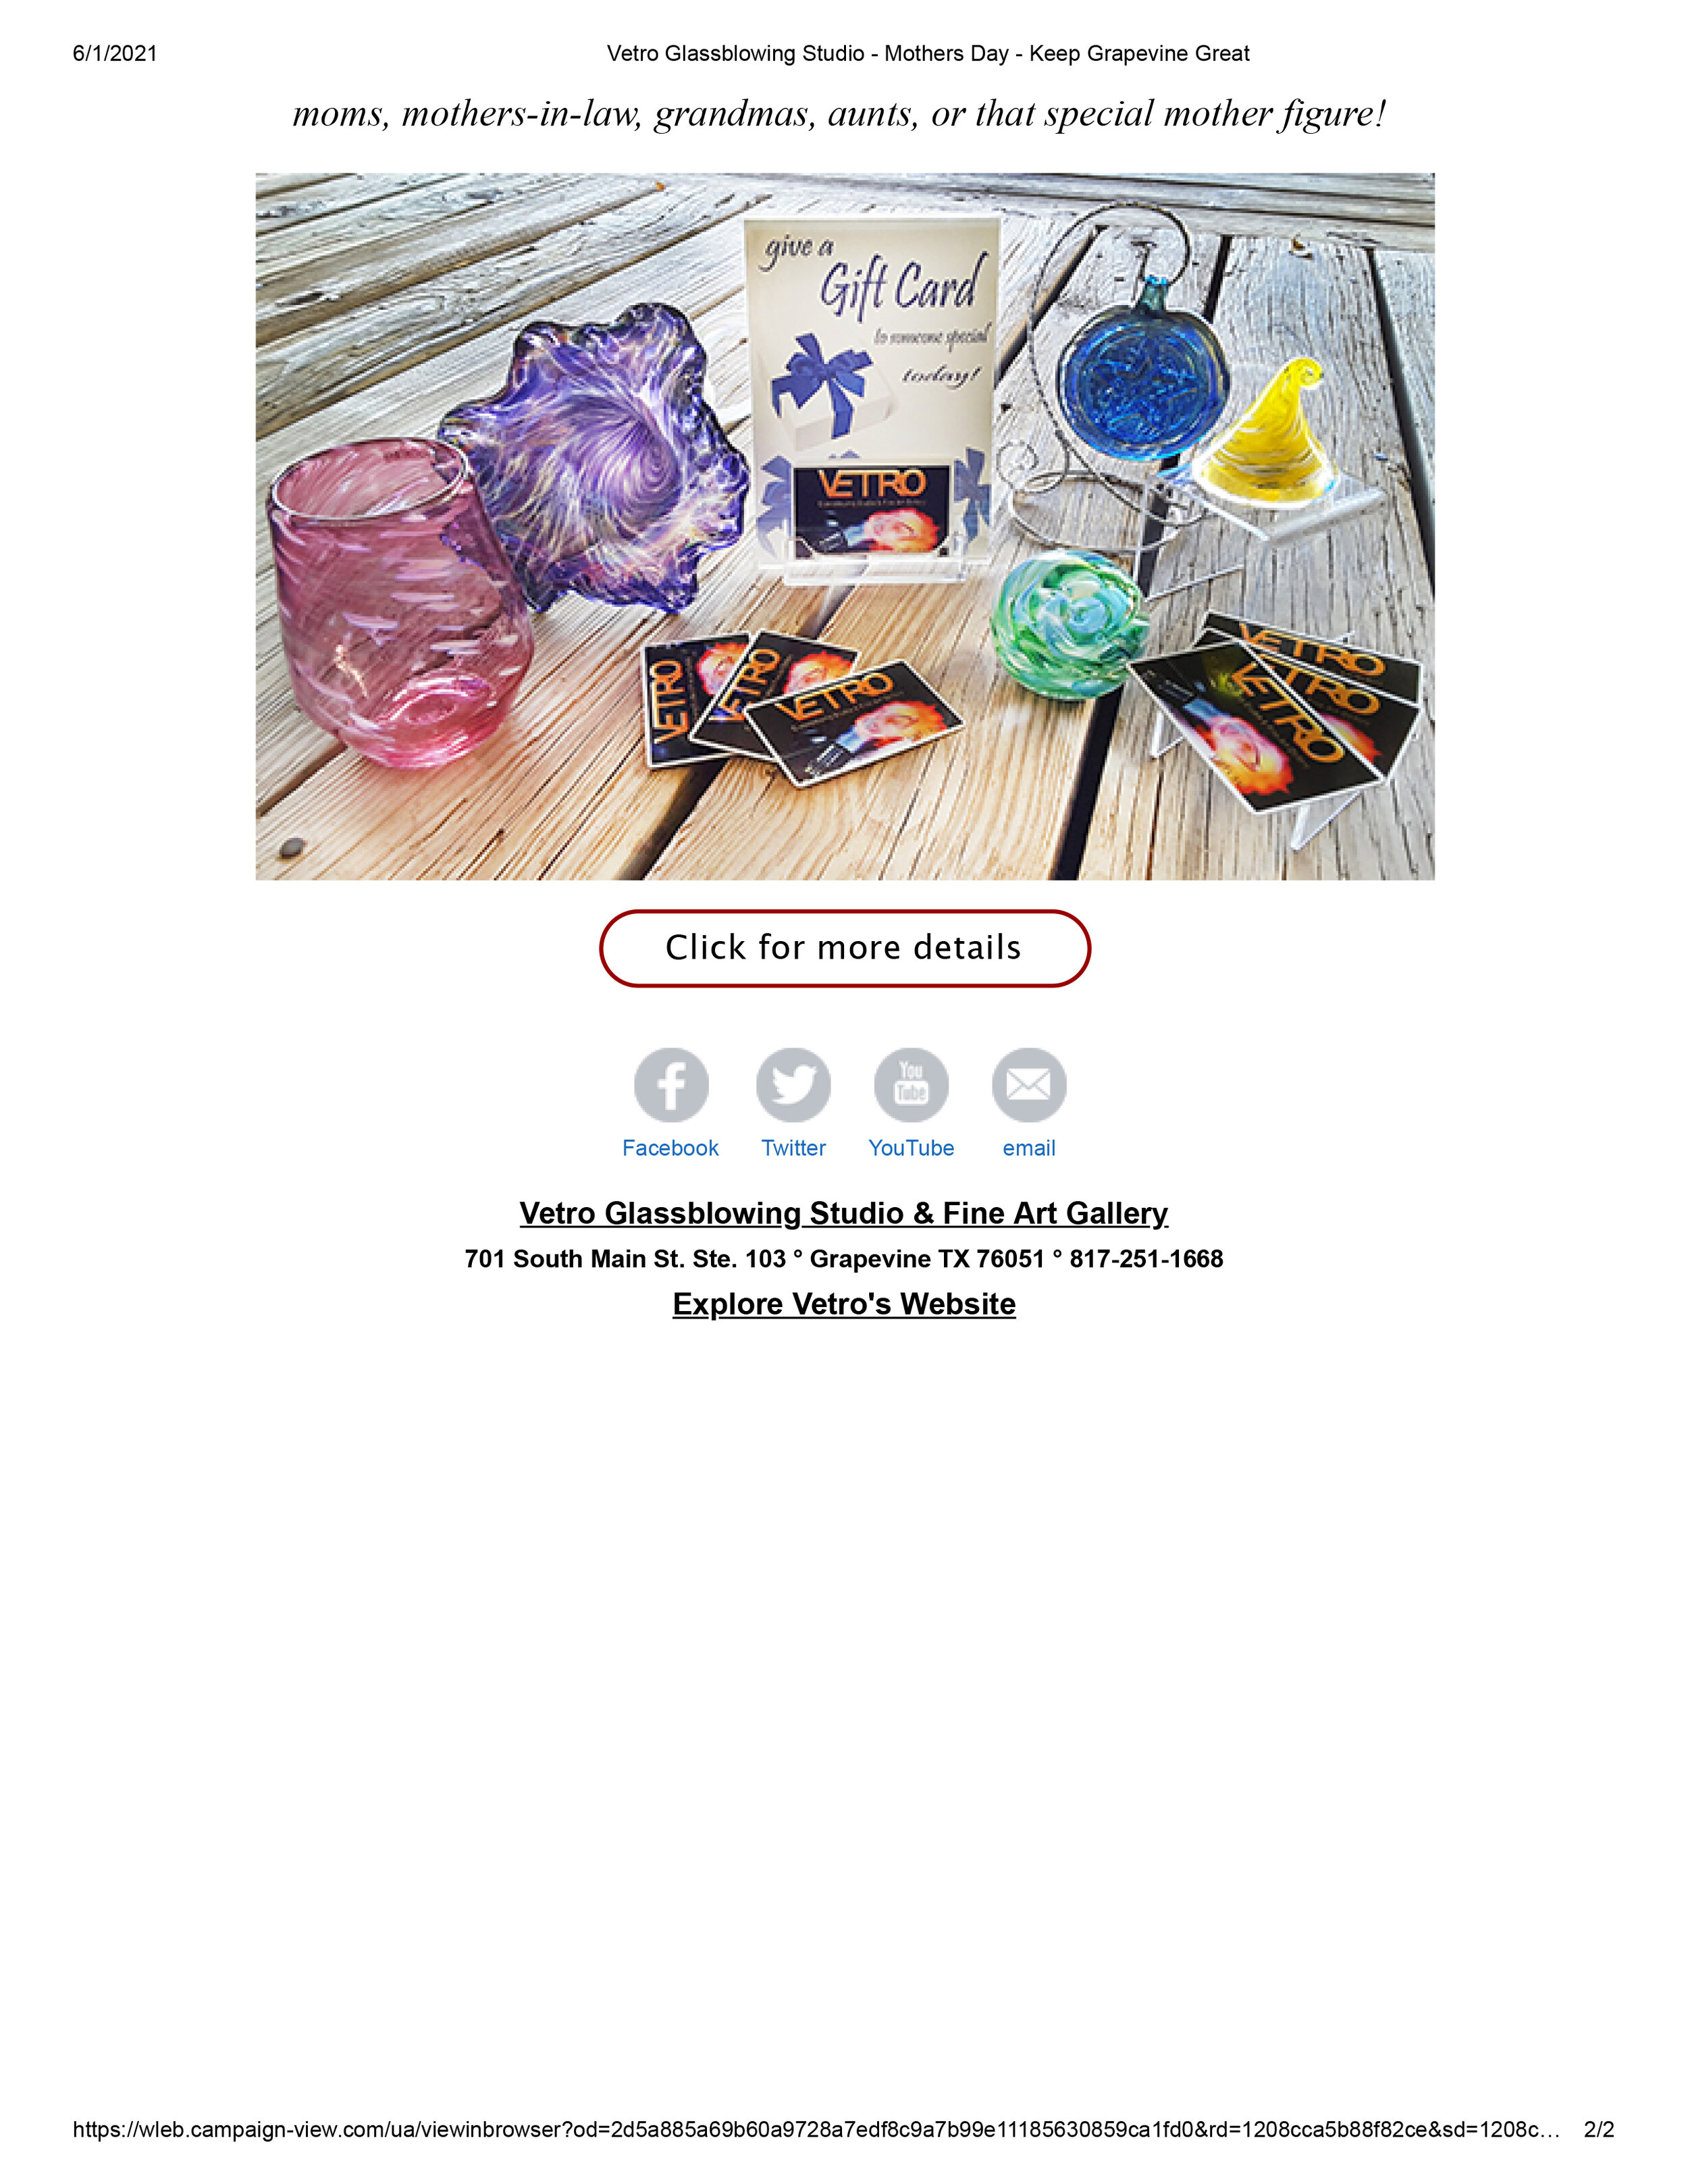 Email Campaigns -Vetro Glassblowing Studio - Keep Grapevine Great-2.jpg